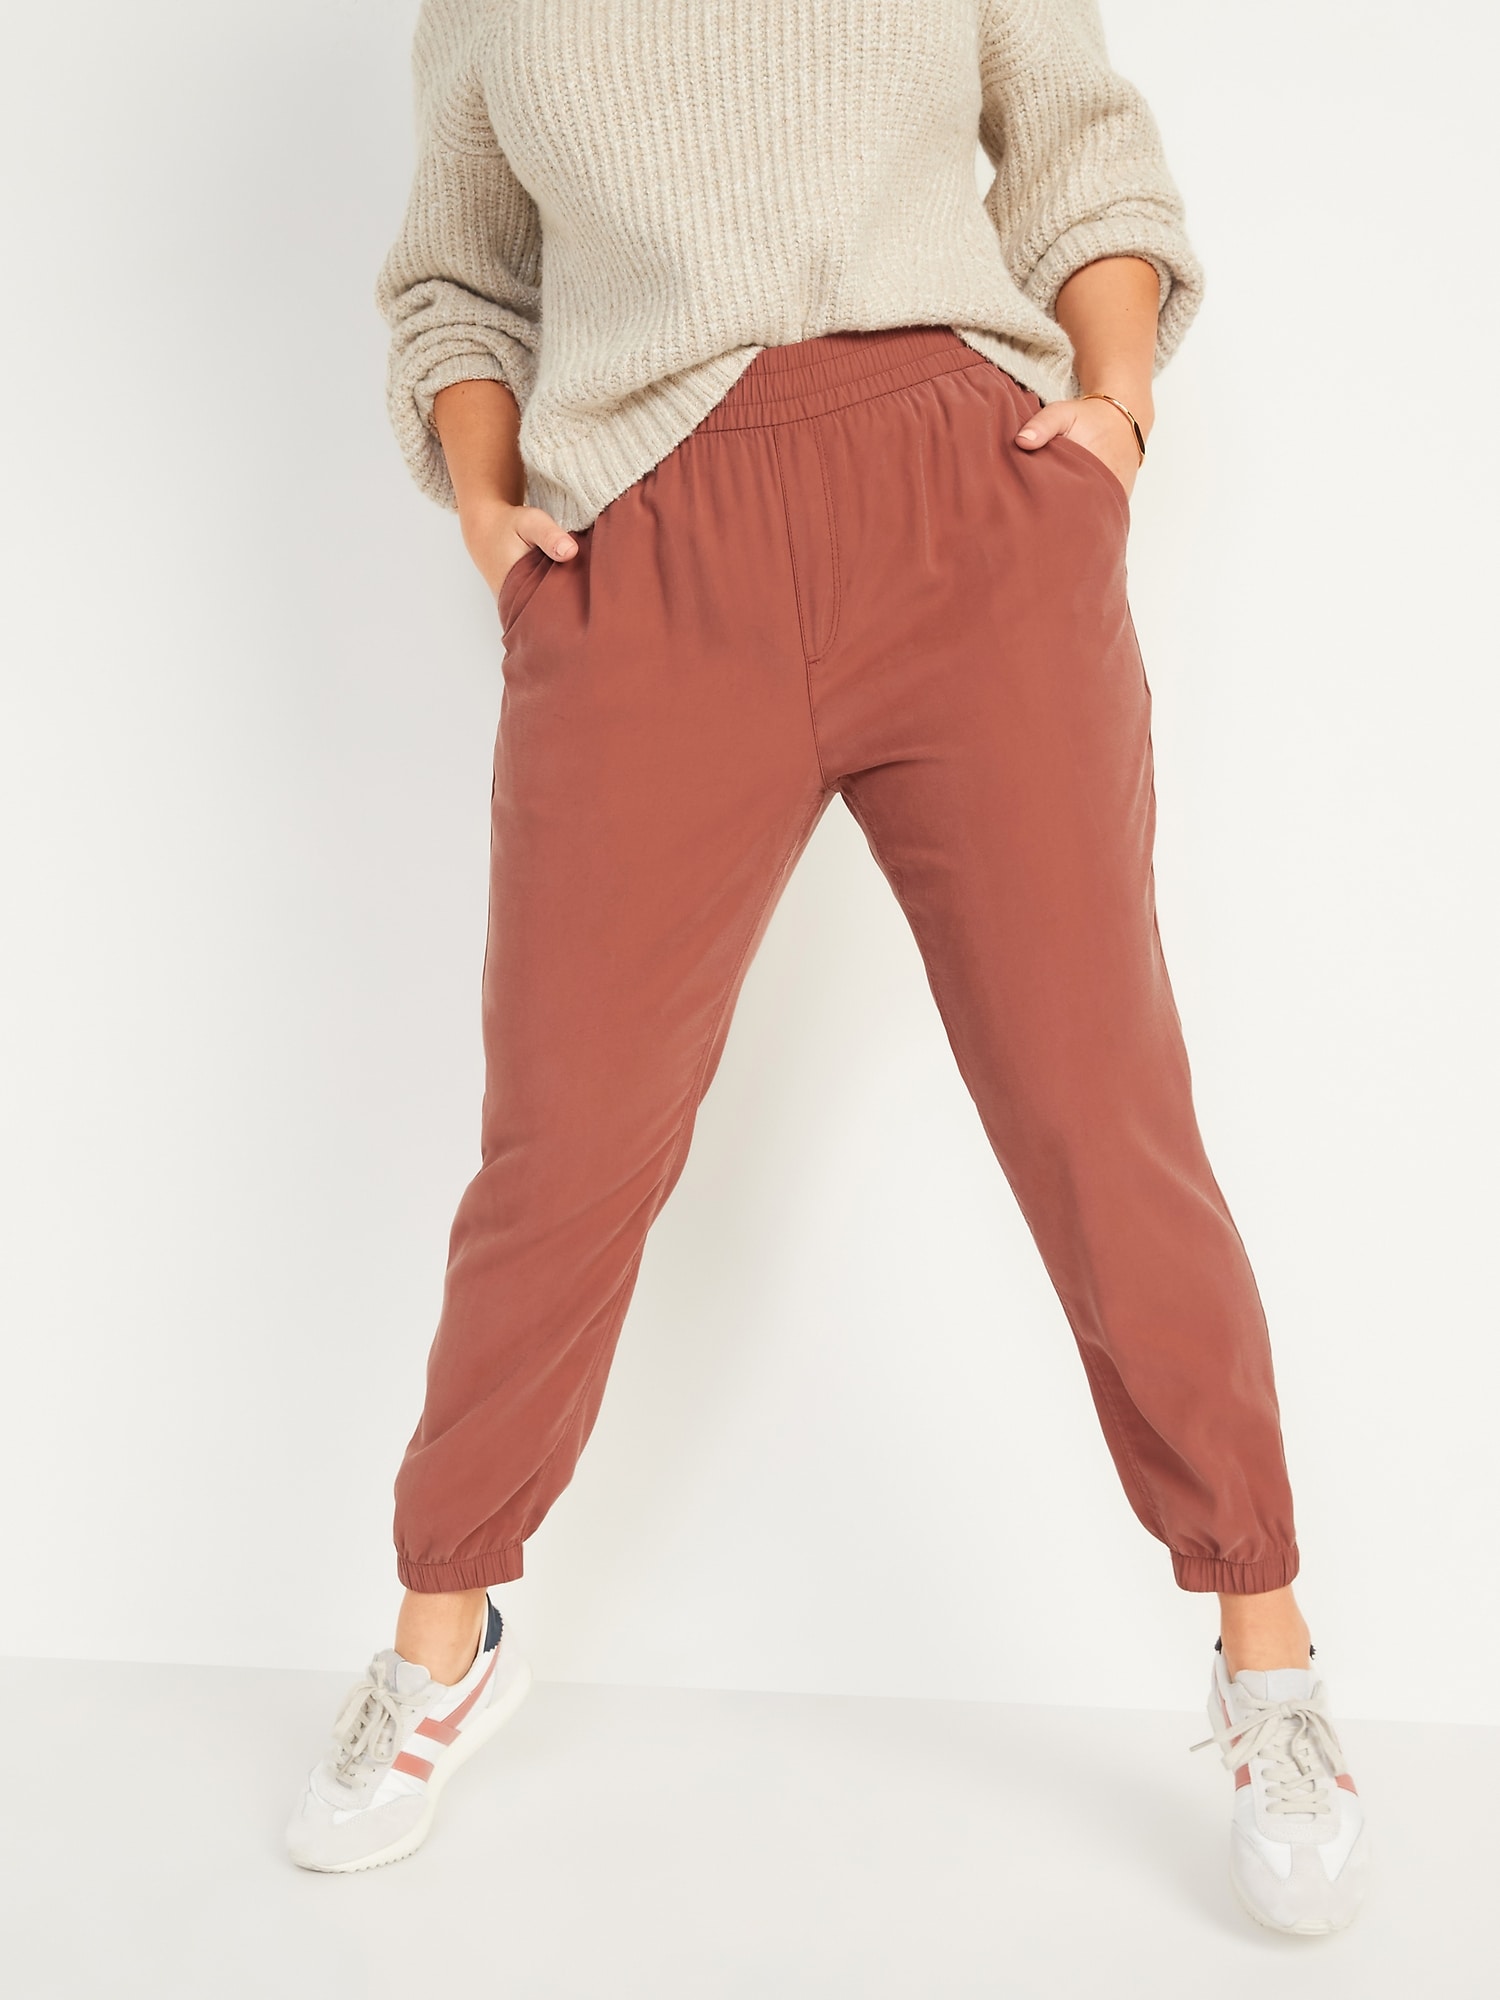 Old Navy Women's Burgundy High-Waisted Twill Jogger Pants Size XXL 3X or 4X  Plus